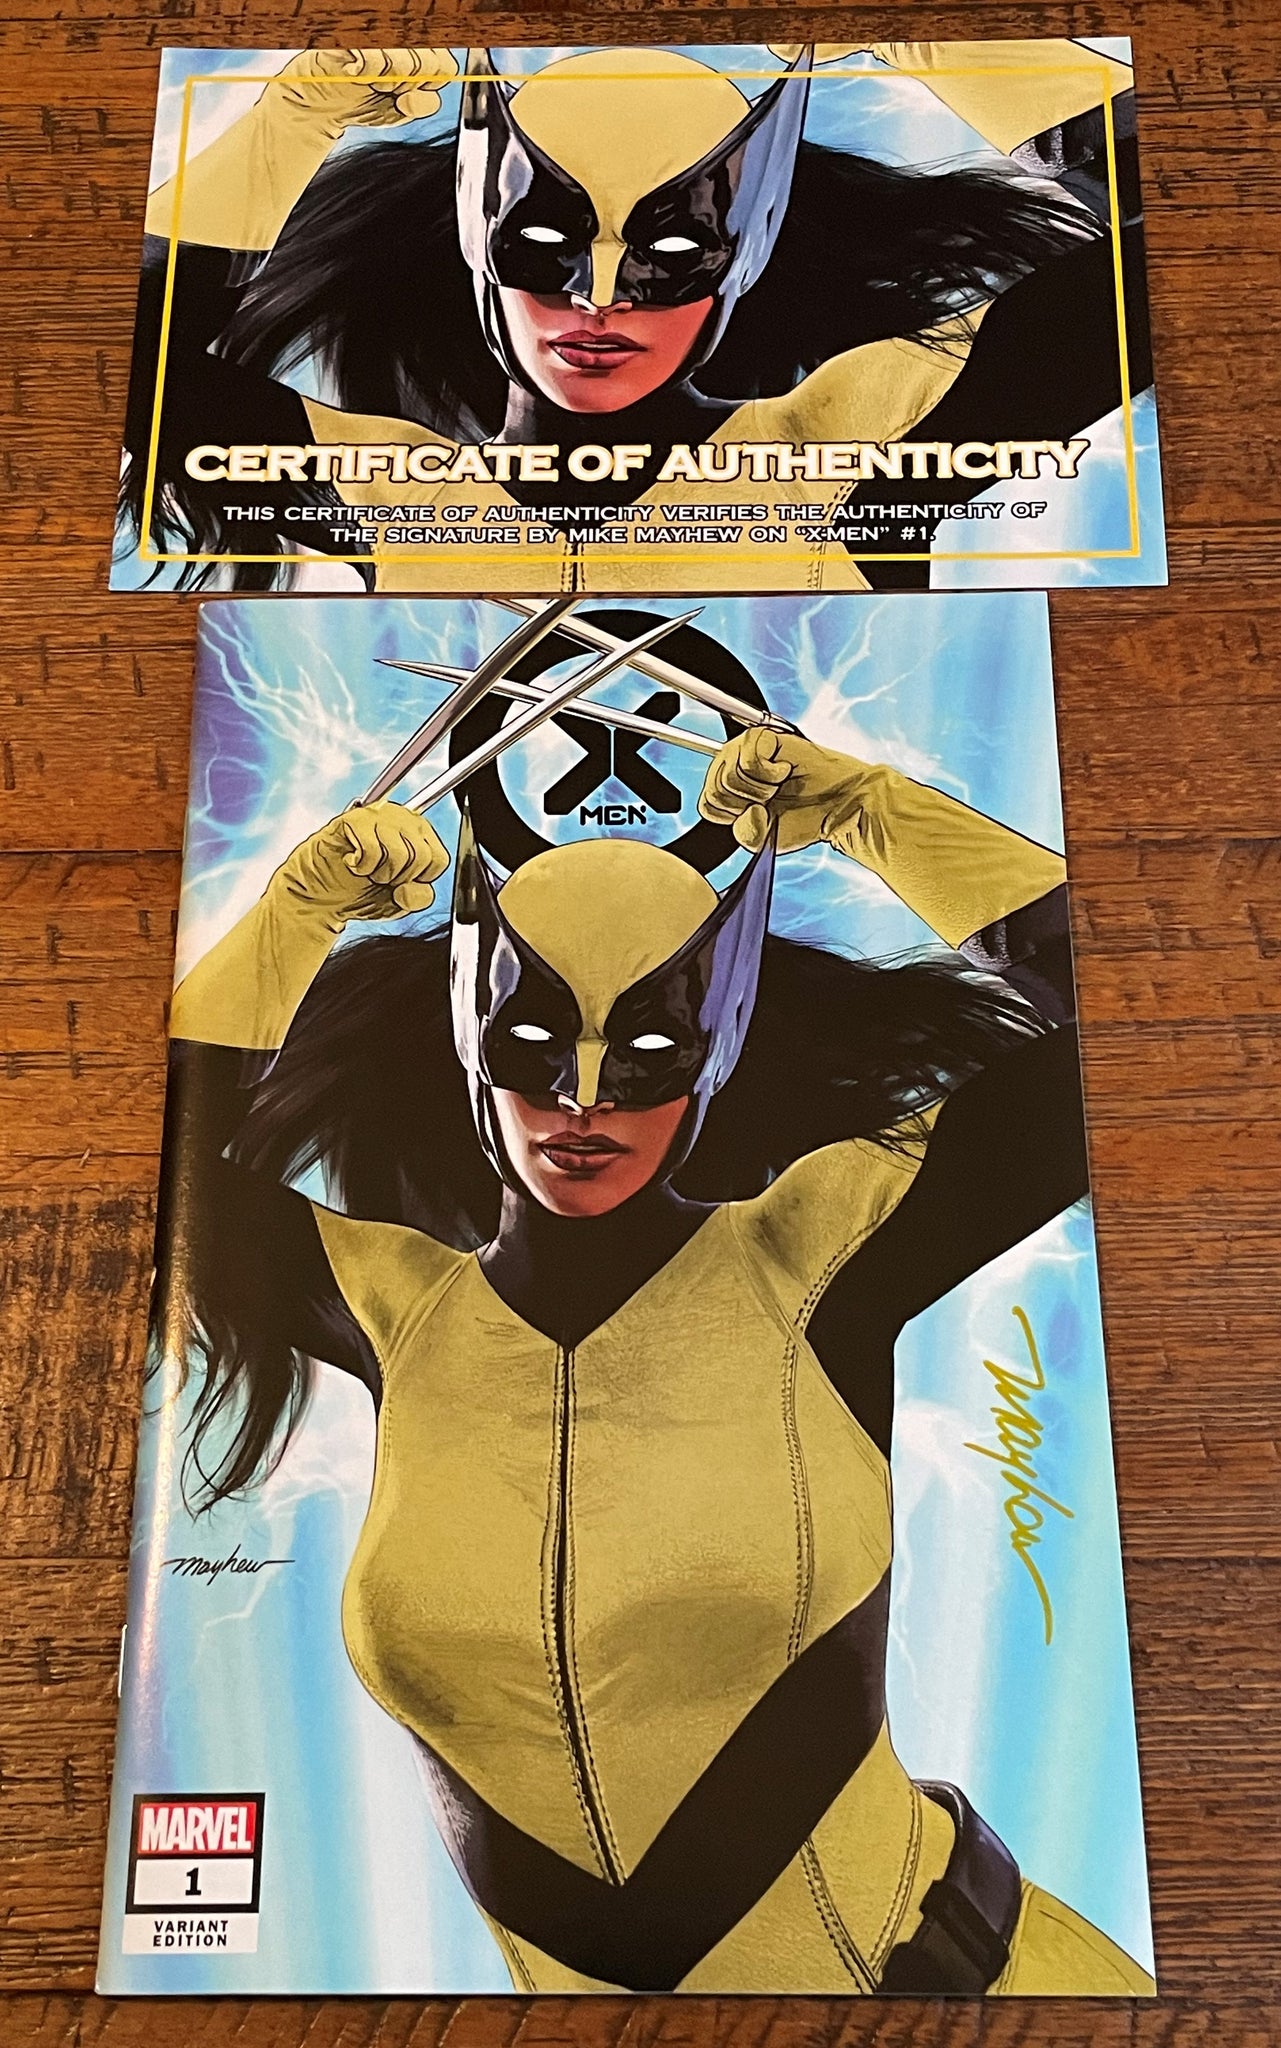 X-MEN #1 MIKE MAYHEW SIGNED COA X-23 EXCLUSIVE TRADE DRESS VARIANT-A